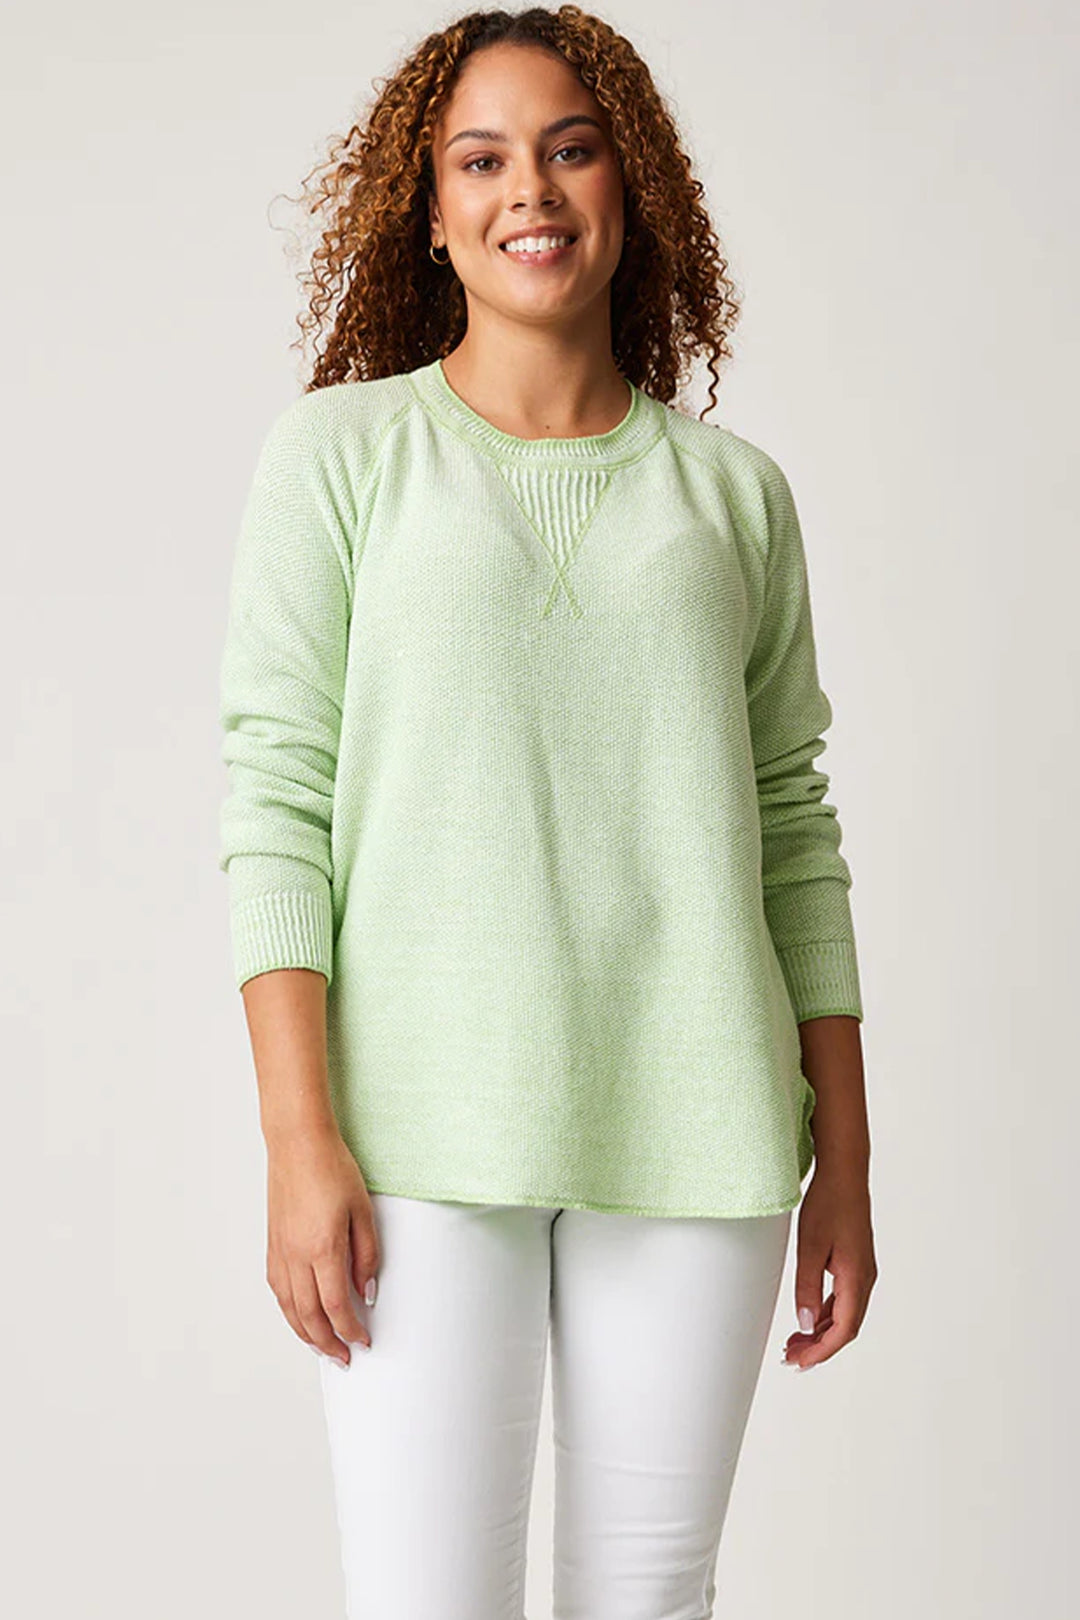 The Skyler Sweater is a stylish and comfortable light sweater, made from 100% cotton and available in lovley spring colours.